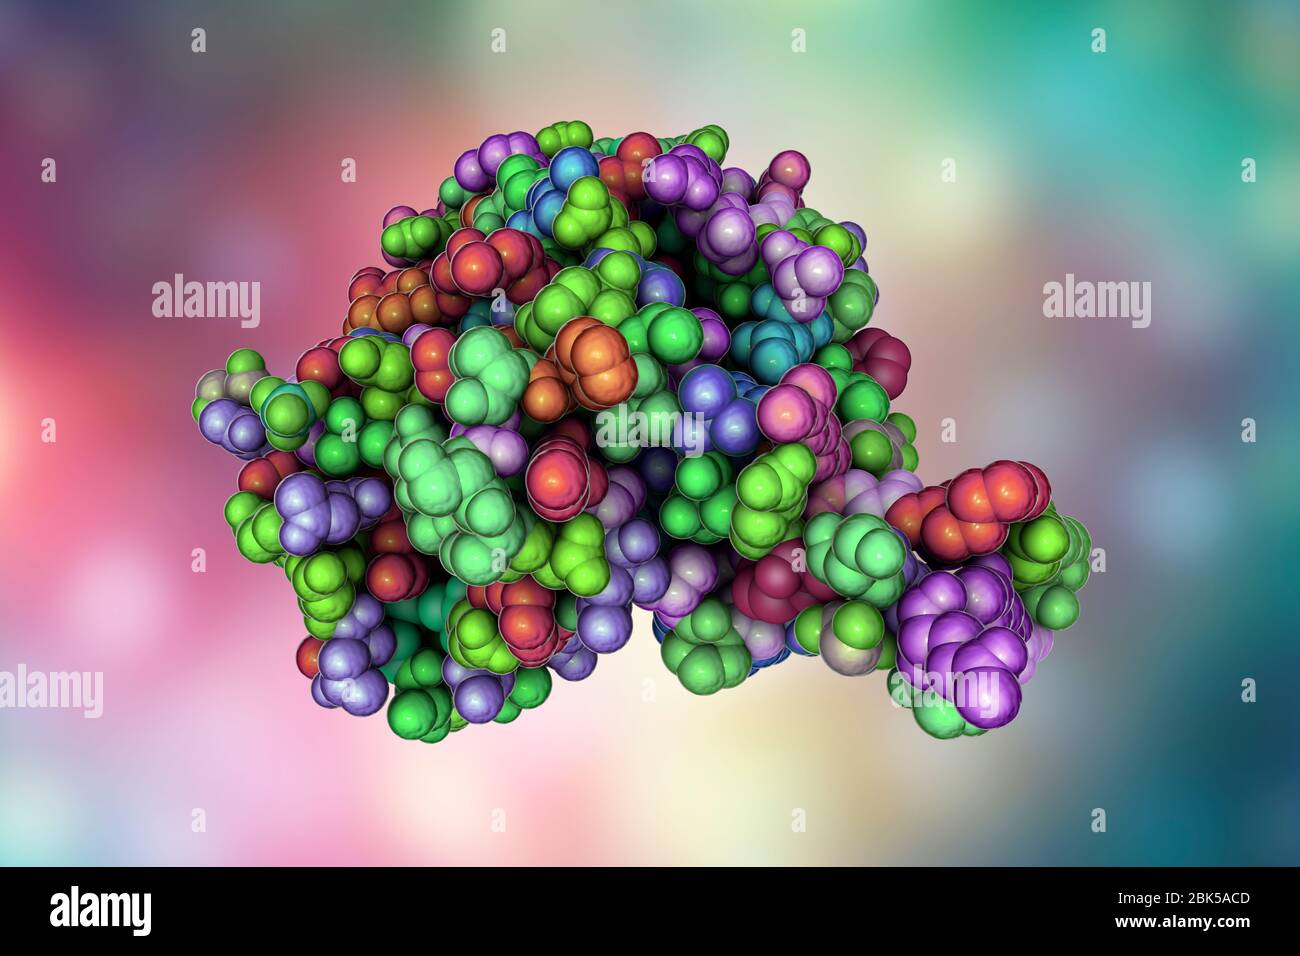 Hantavirus (Hantaan virus) envelope glycoprotein Gn, asymmetric unit, computer illustration. The molecule which forms surface spikes of the virus and is responsible for host cell entry. Stock Photo